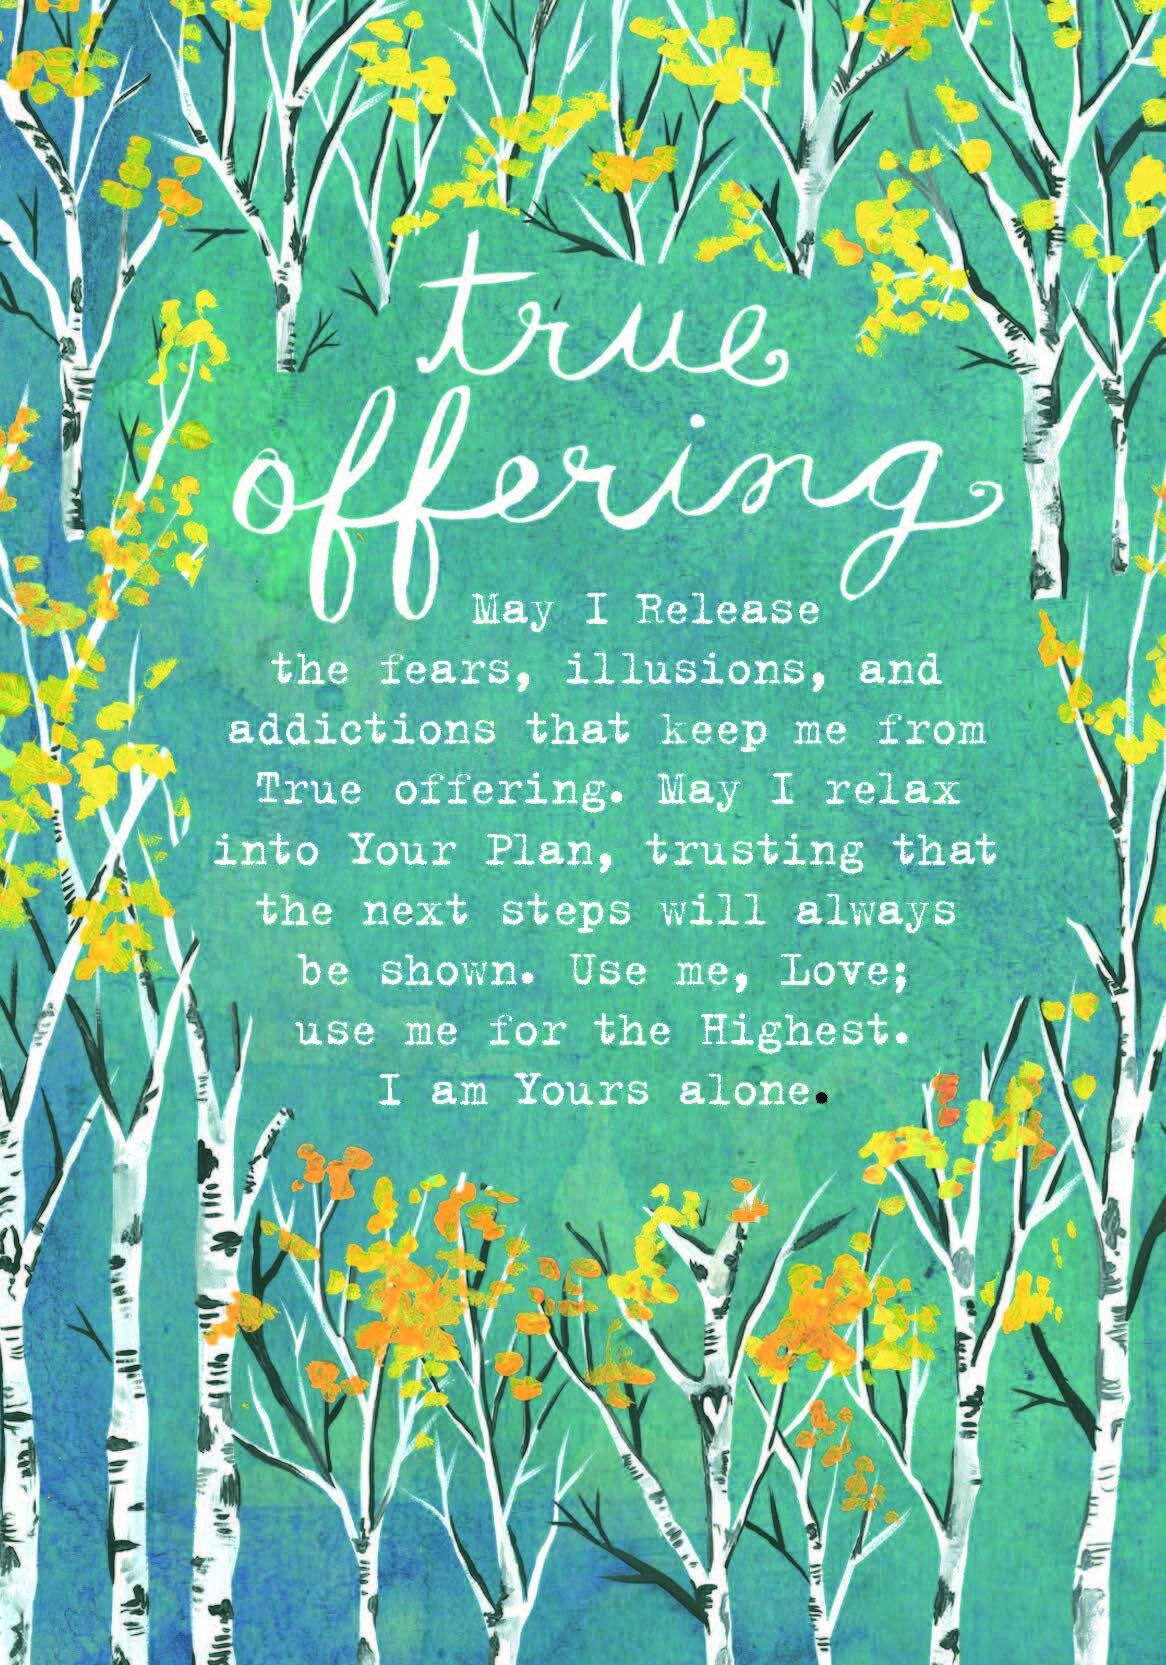 The Wild Offering Oracle Cards by Tosha Silver